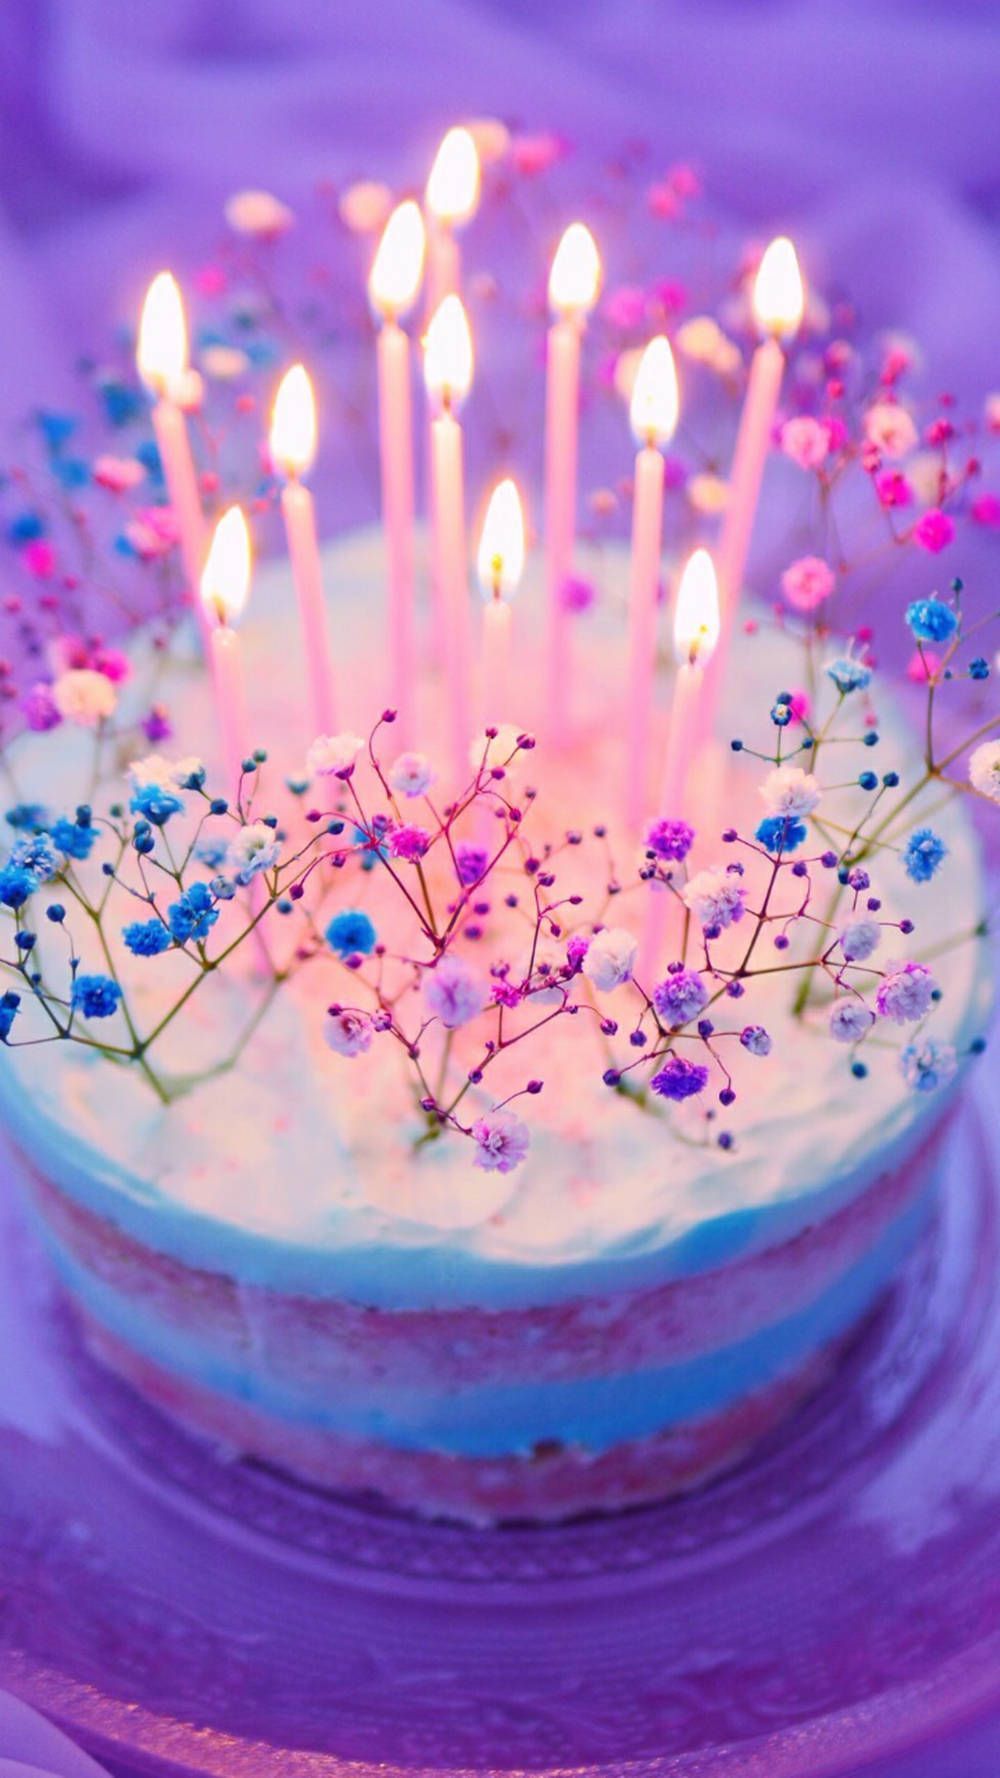 Download Aesthetic Happy Birthday Cake And Candles Wallpaper